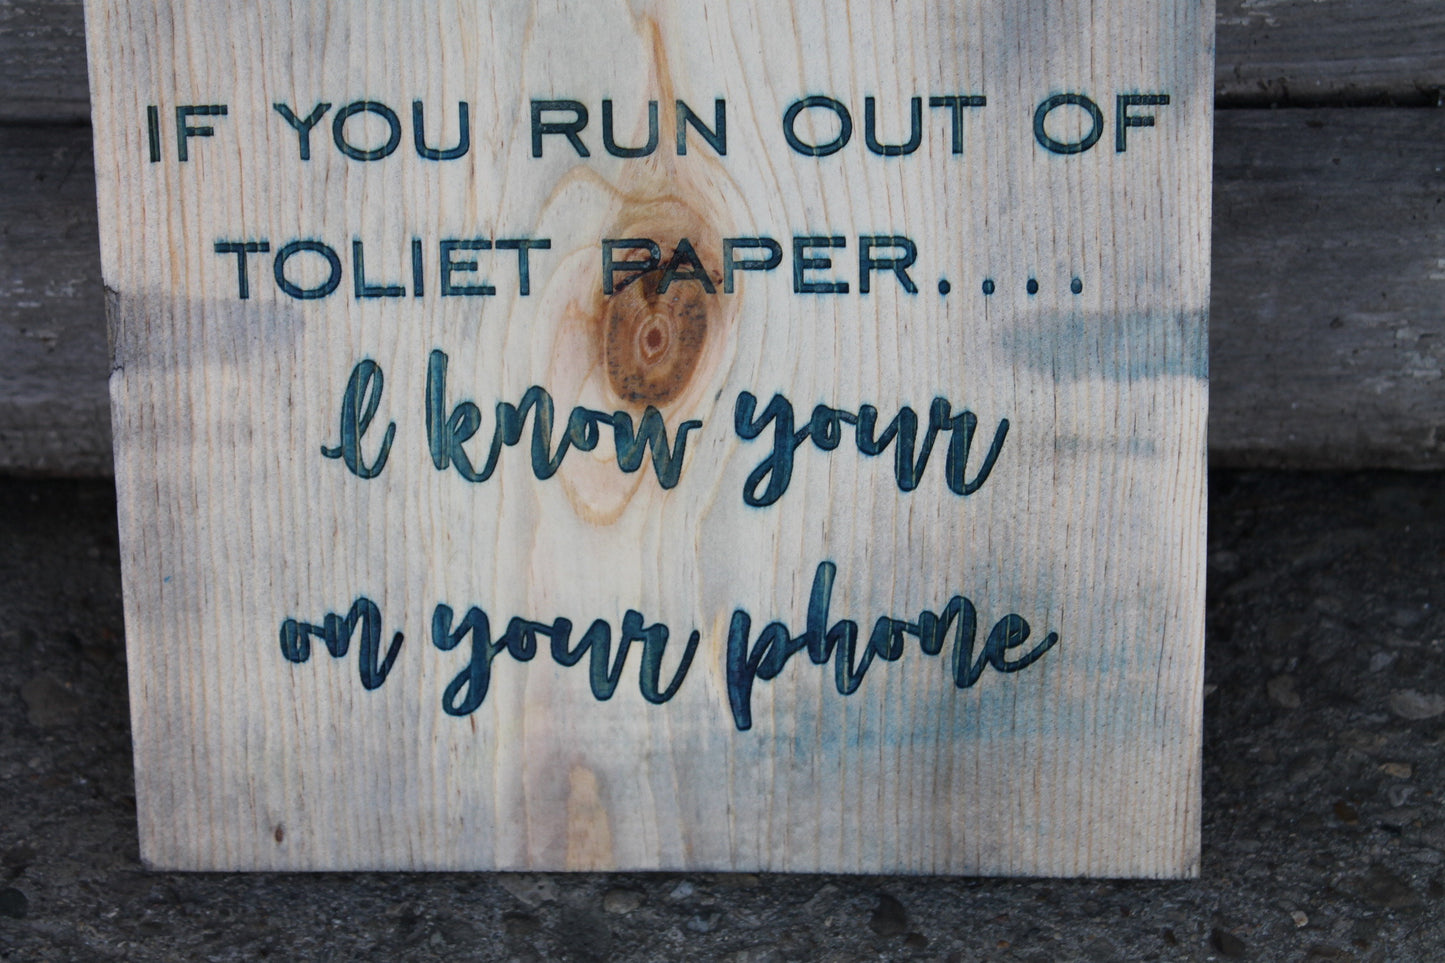 Bathroom, Sign,  Funny, Text me, Out of toilet paper,  Humor, Engraved, Rustic, Wood, Gross, Joke, Silly, Guest Bath, Decor, Clean